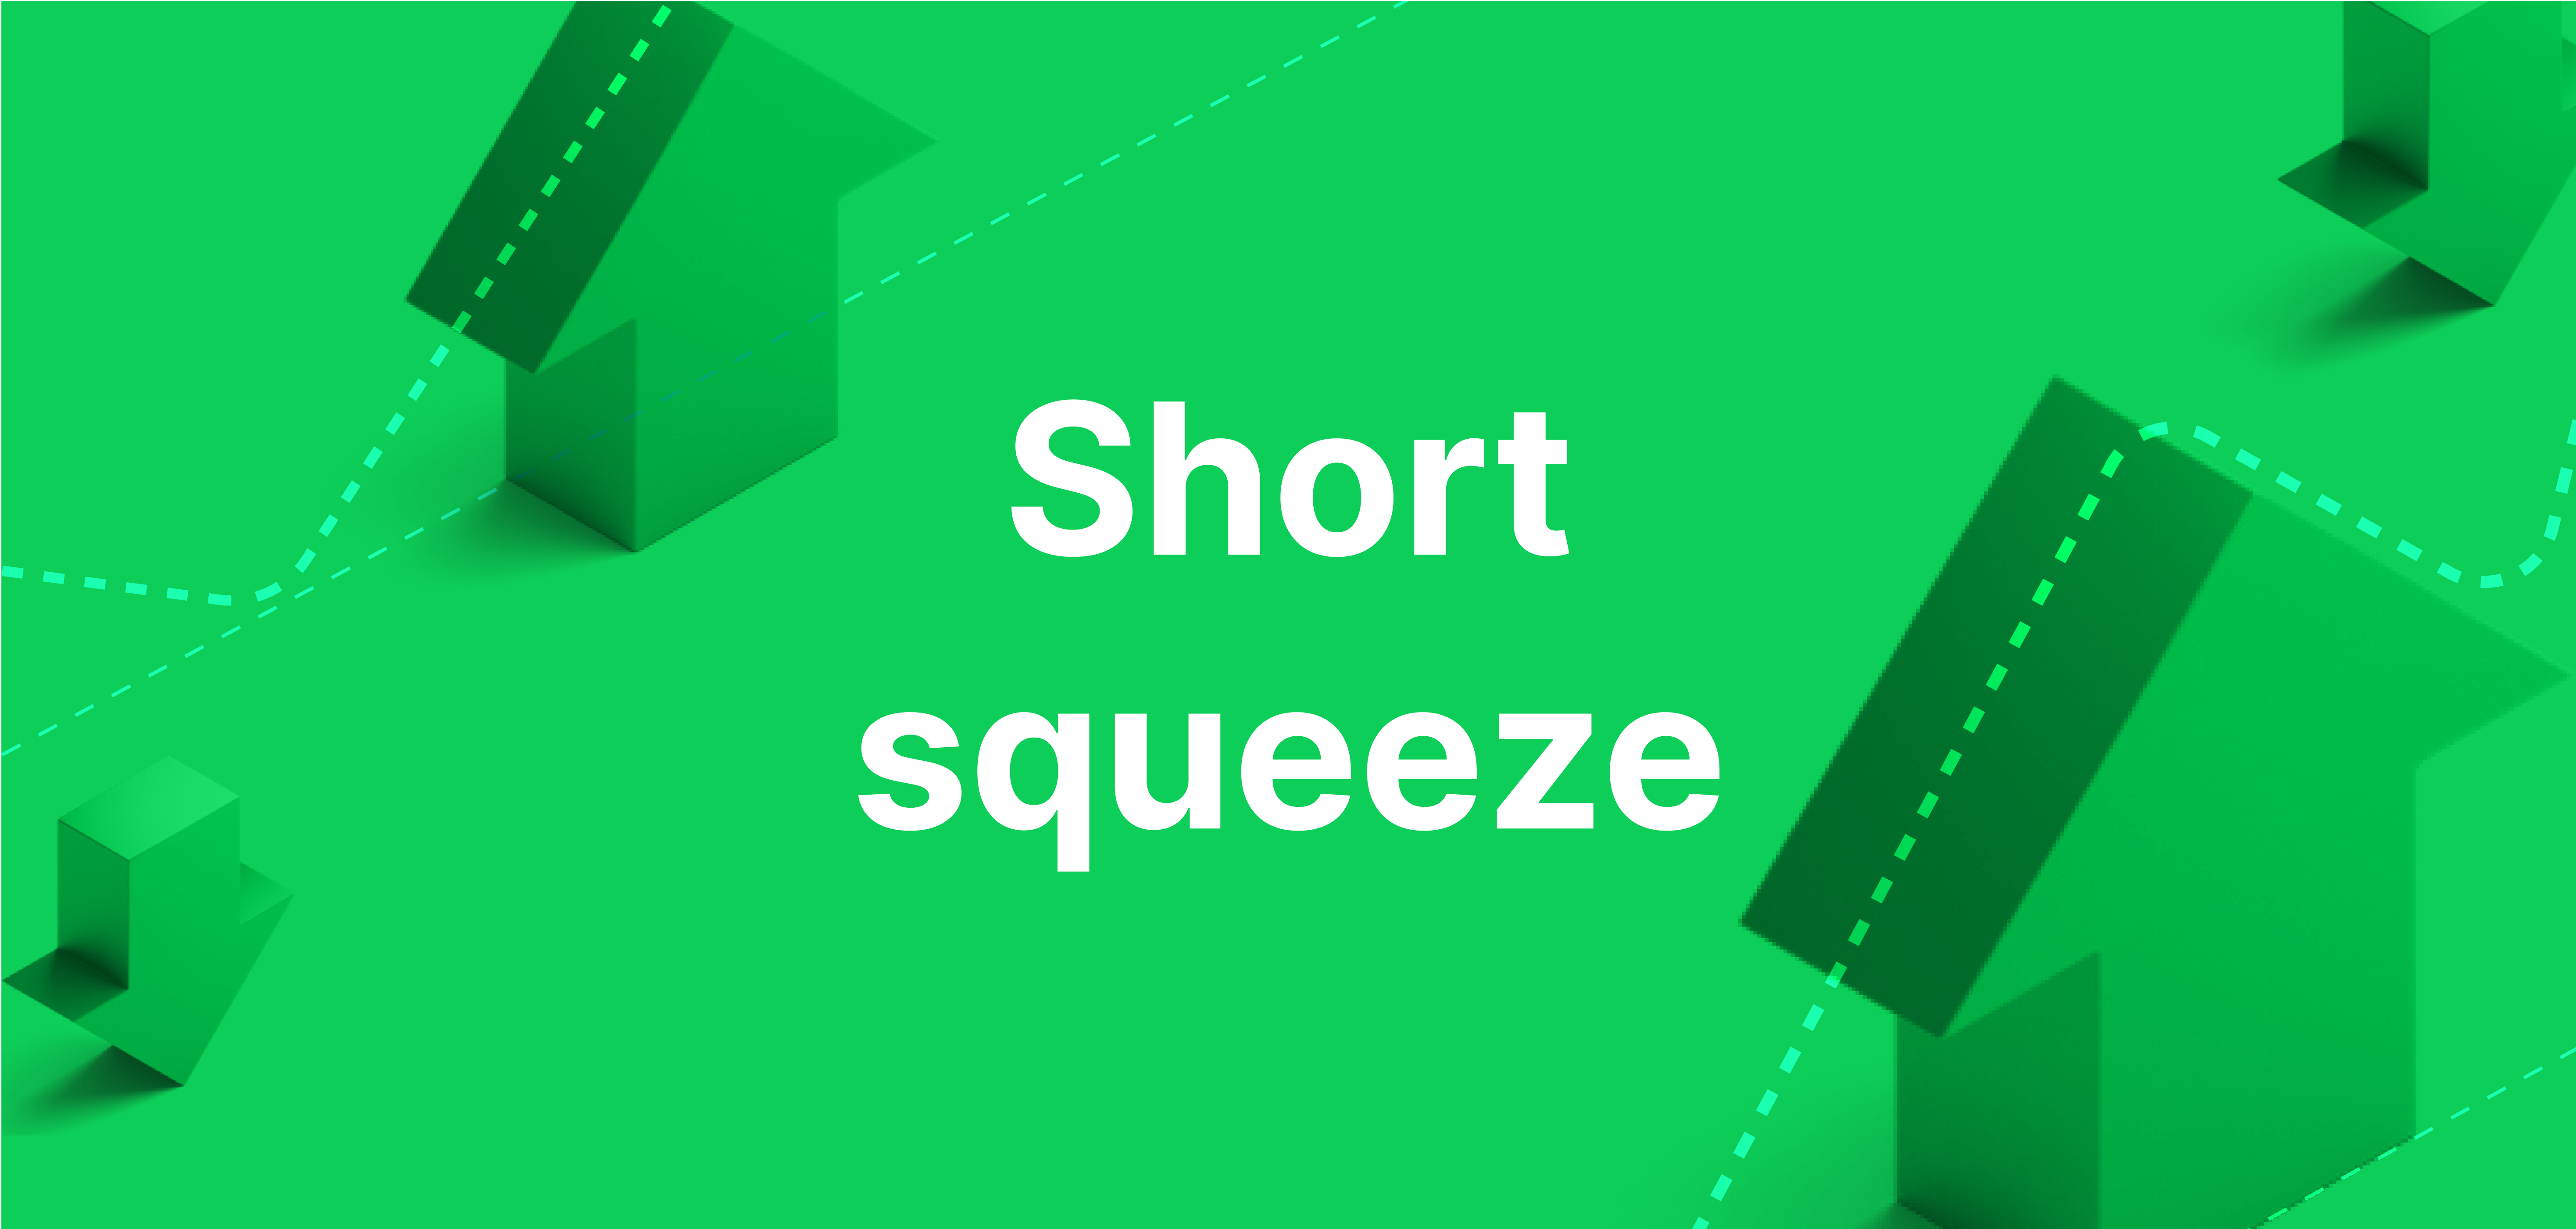 What Is a Short Squeeze? Definition & Examples